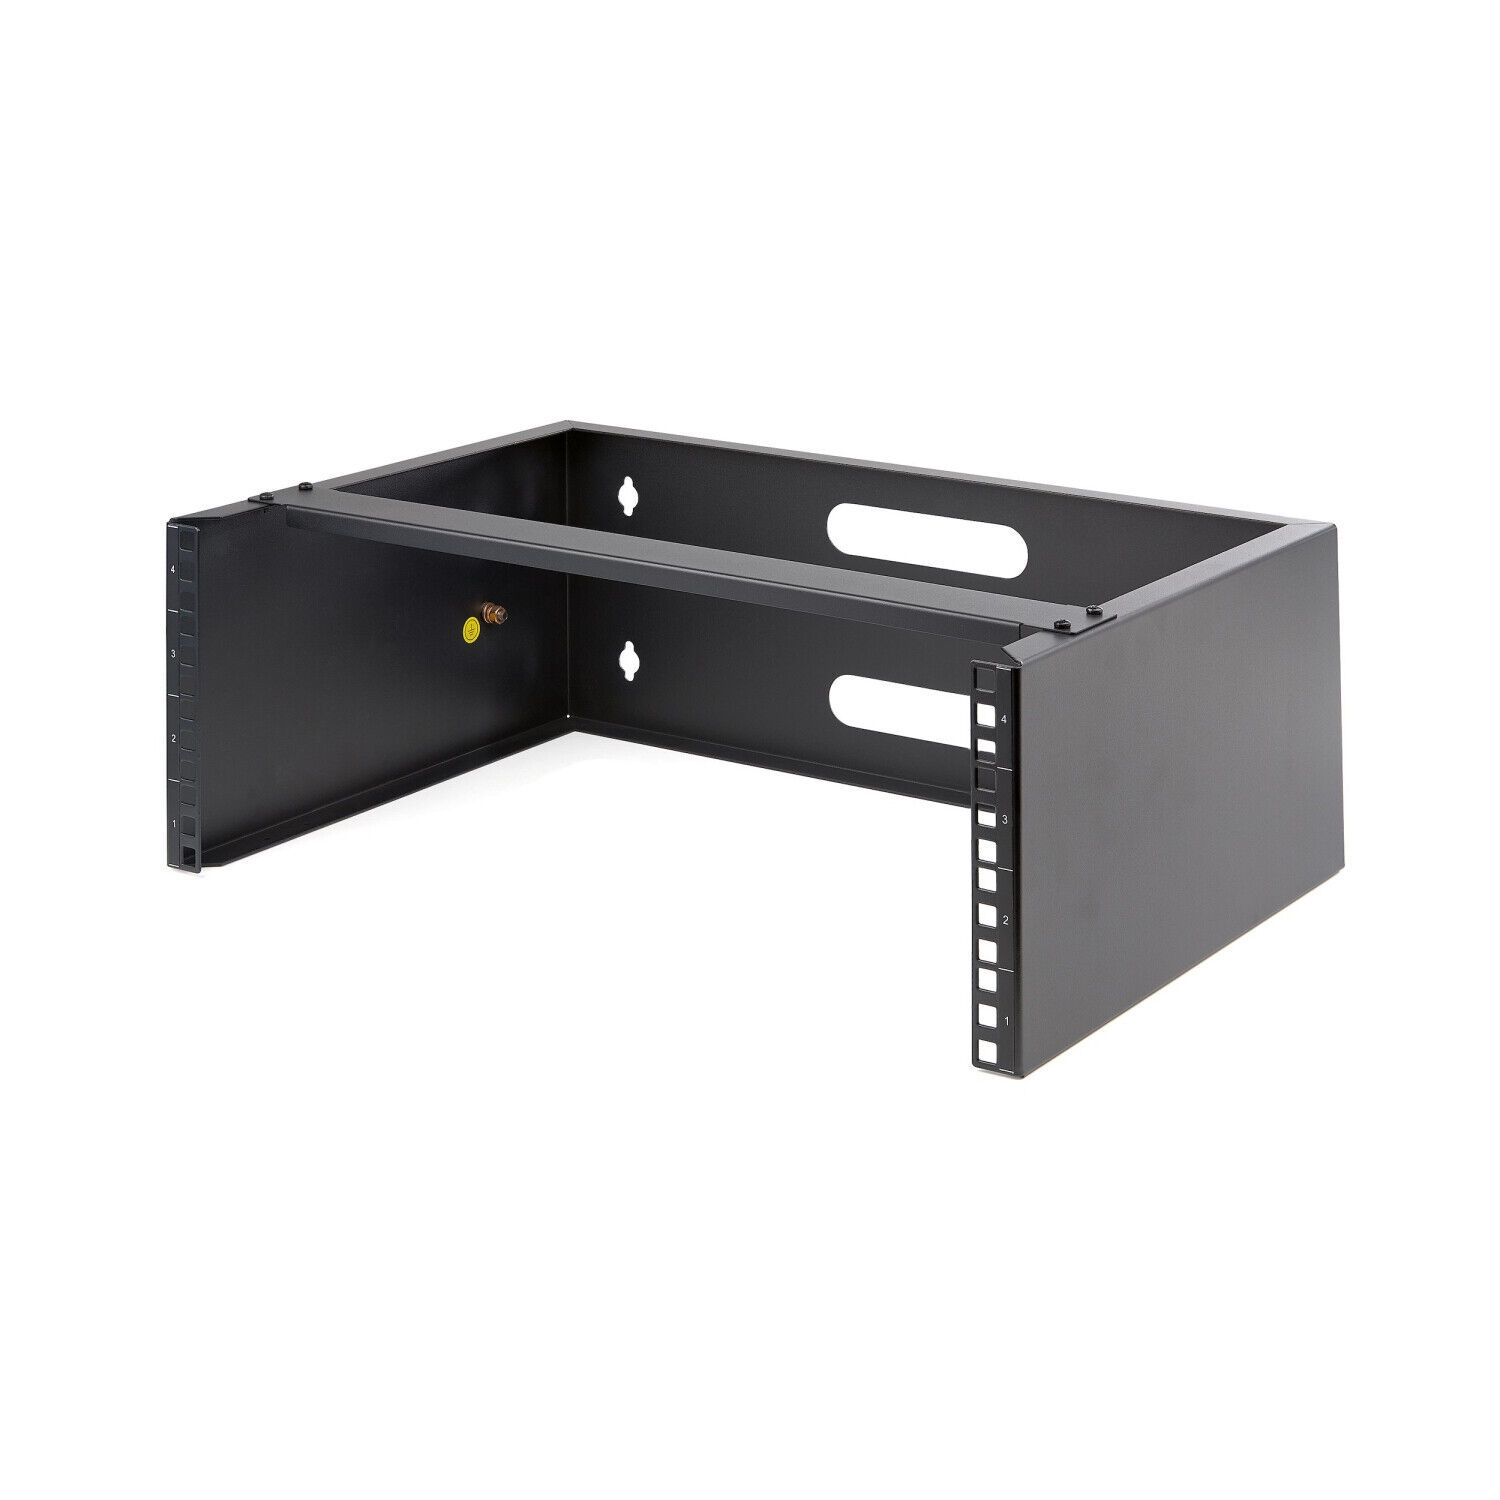 Primary image for STARTECH.COM WALLMOUNT4 4U WALL MOUNT RACK (19IN) - 14IN DEEP